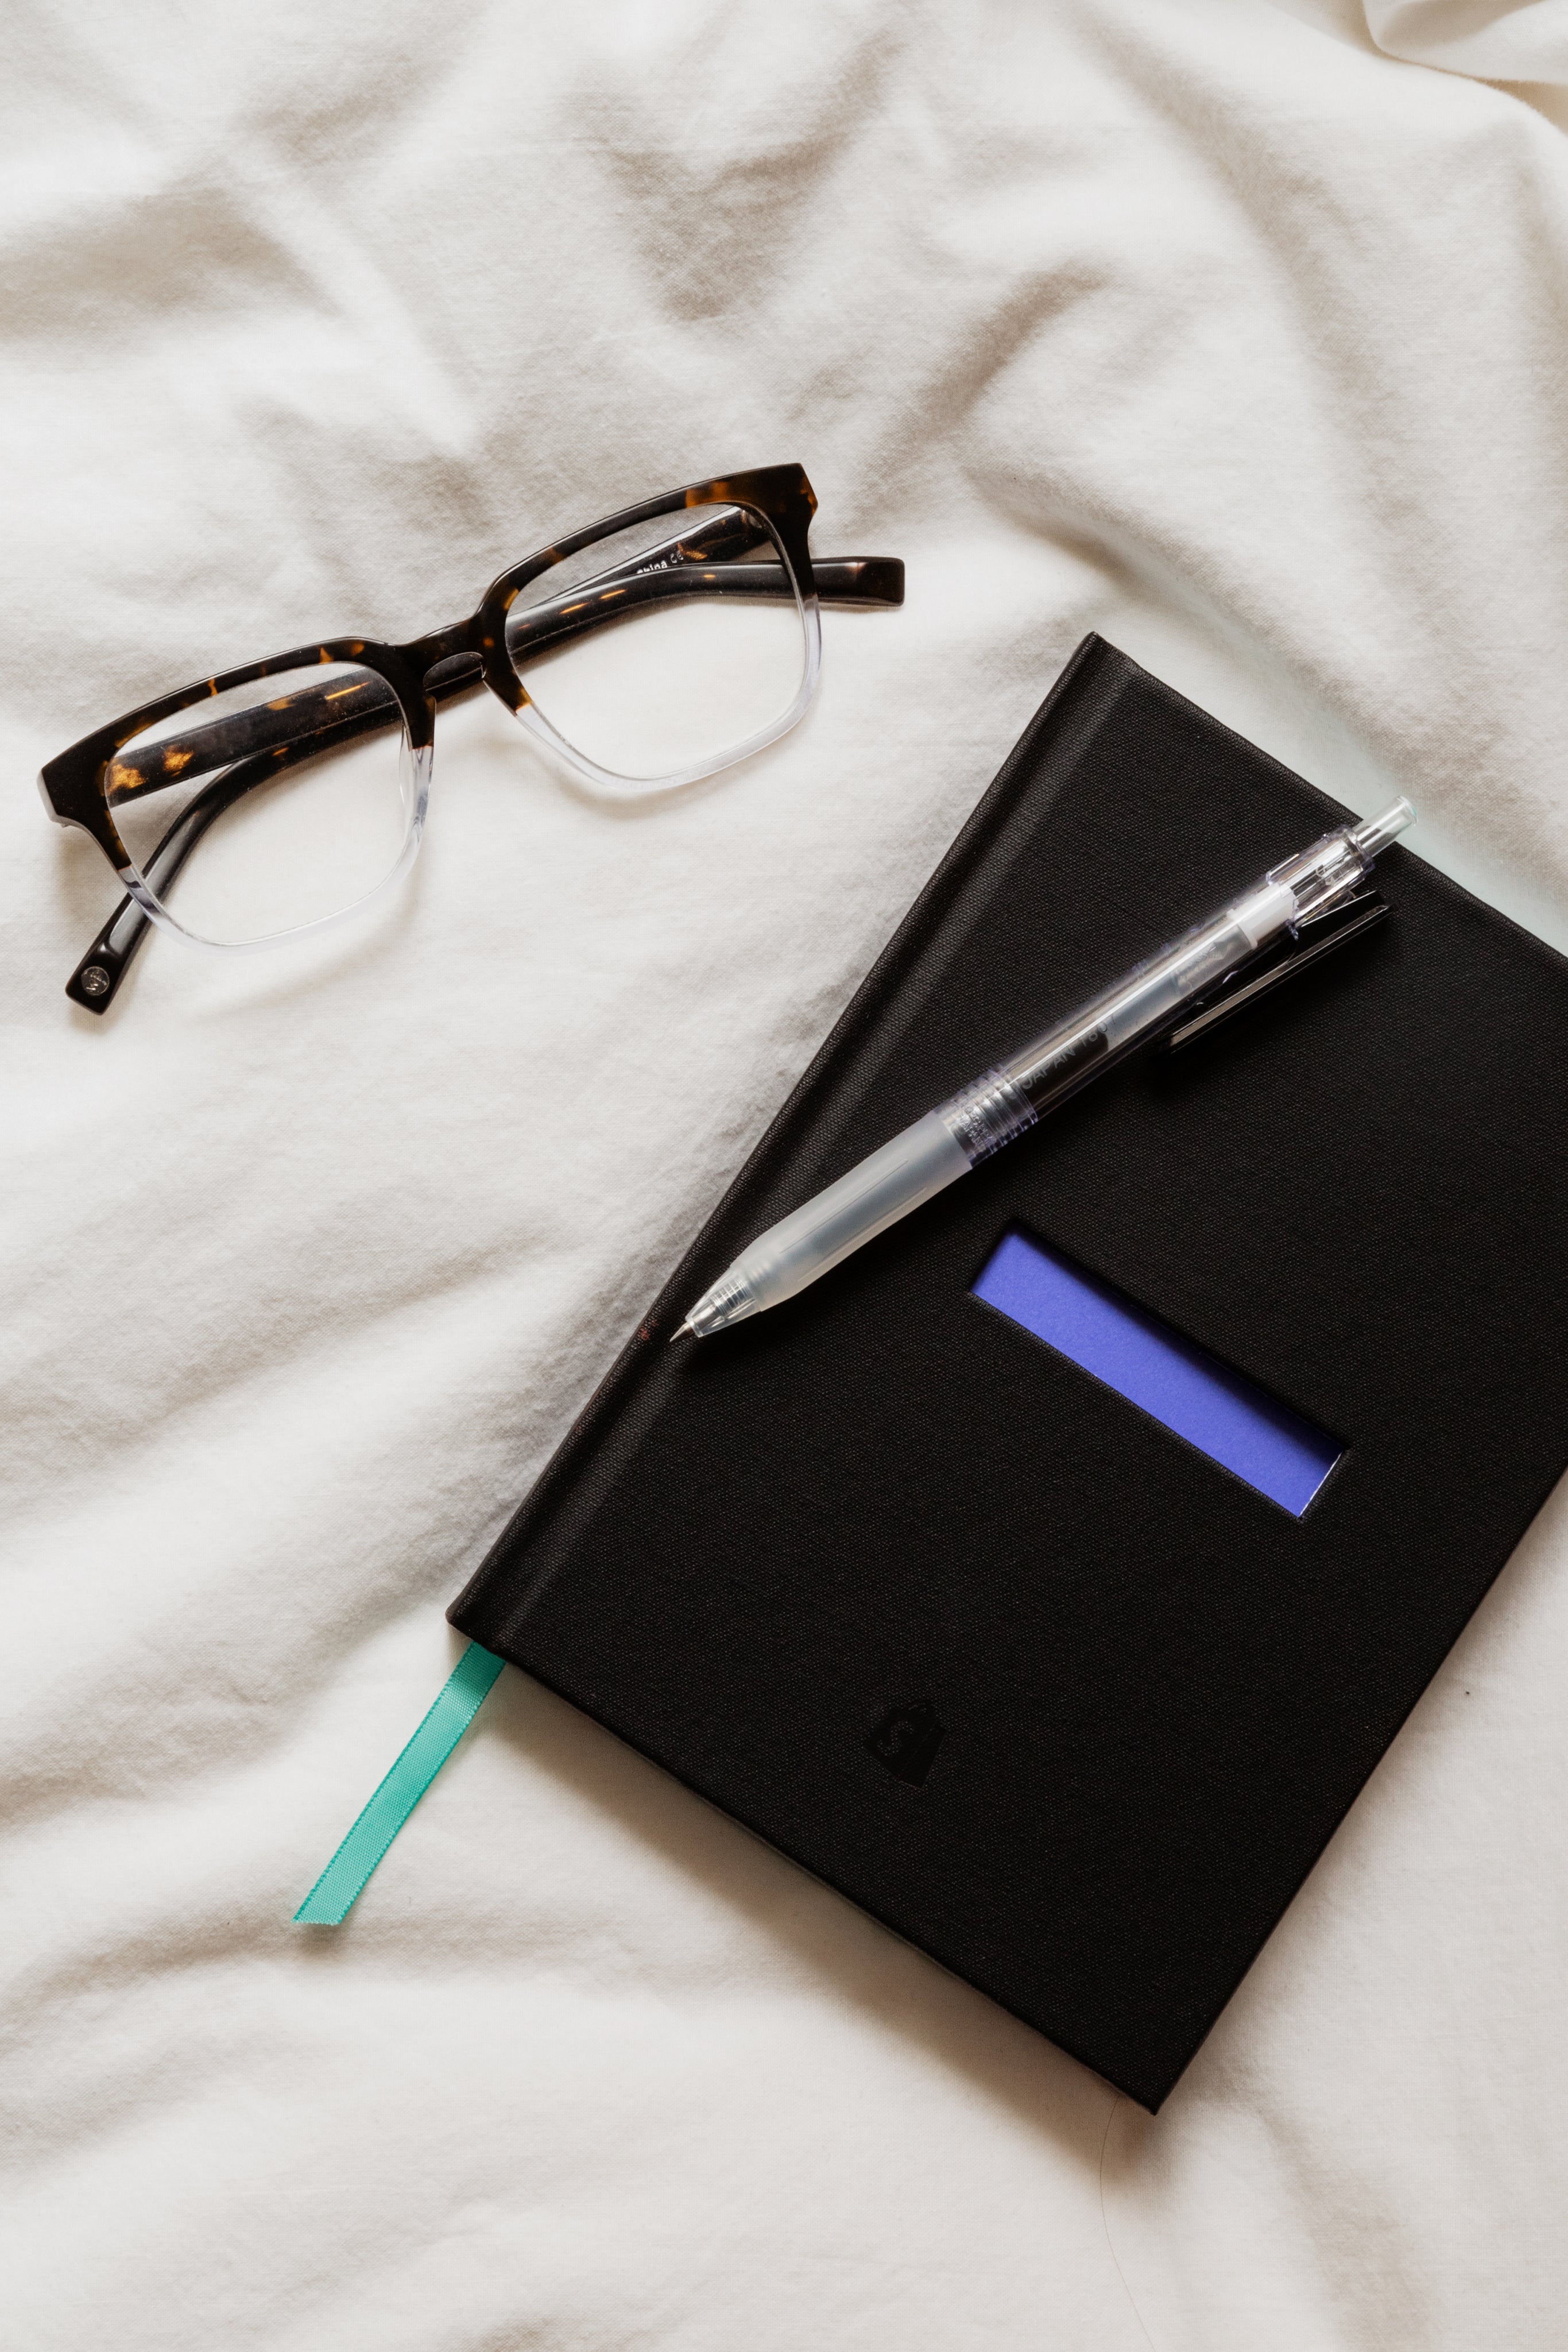 notebook-and-glasses.jpg